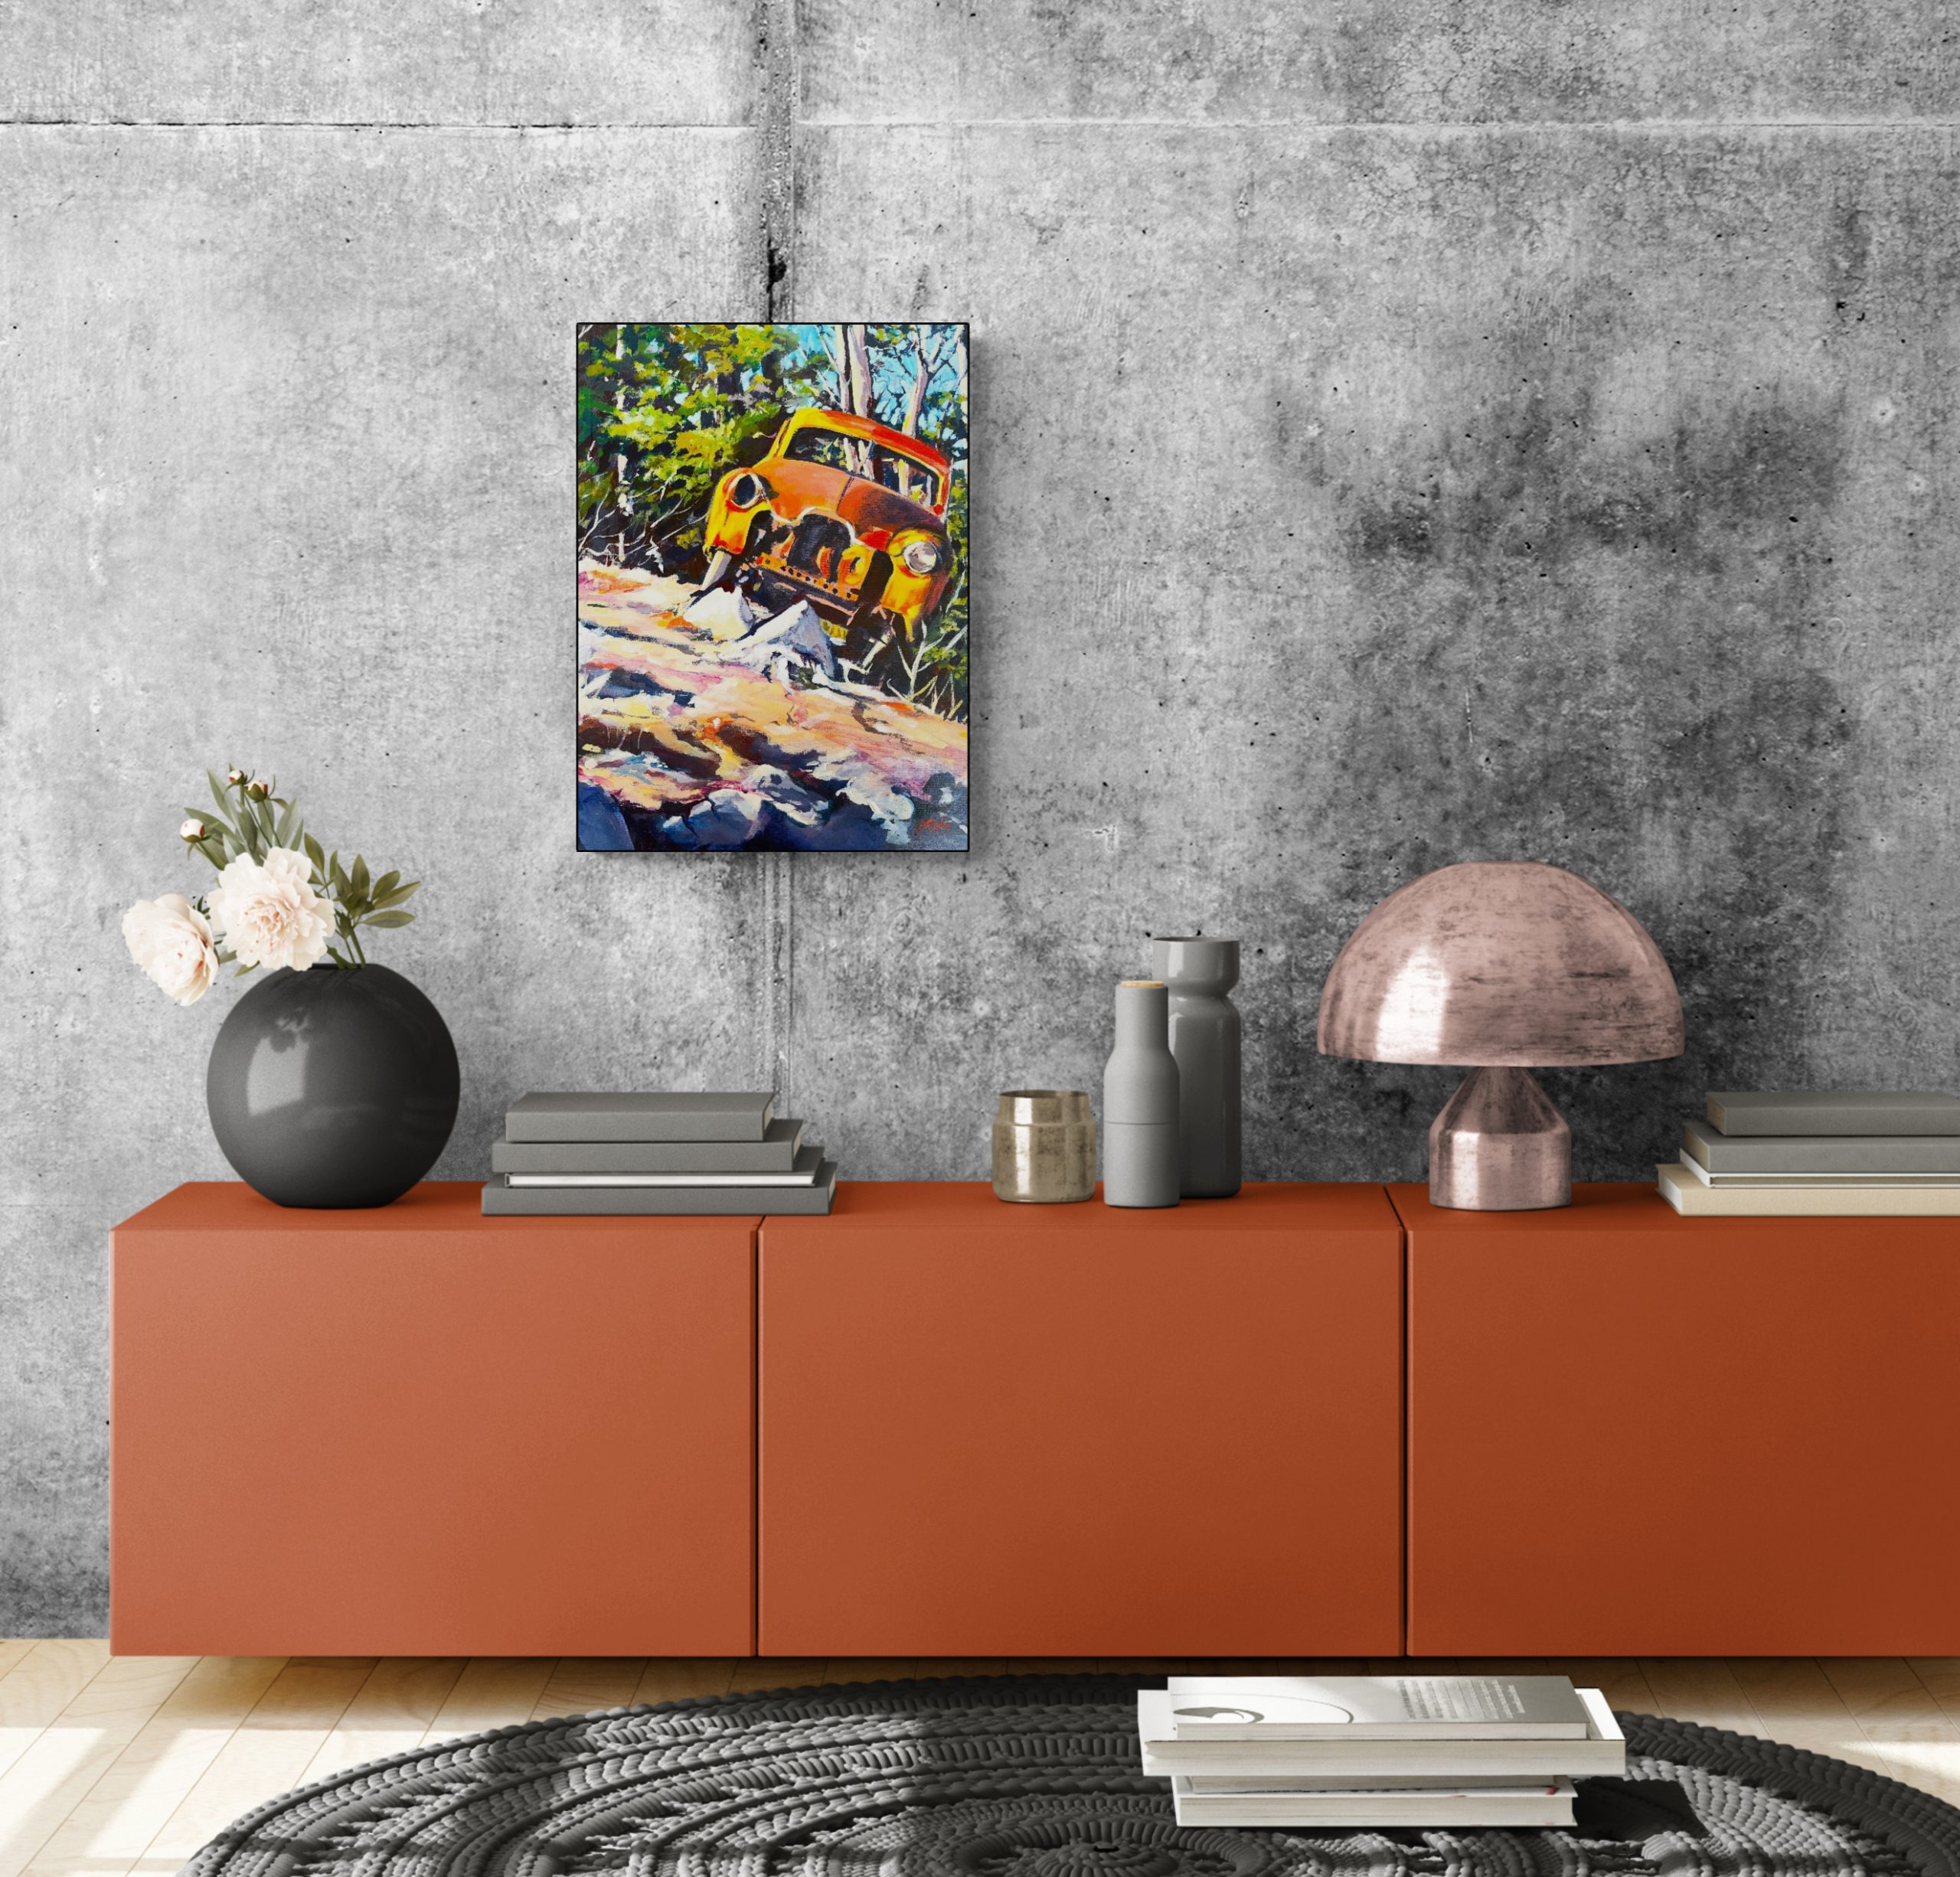 Colorful Living Room Cabinet (1)